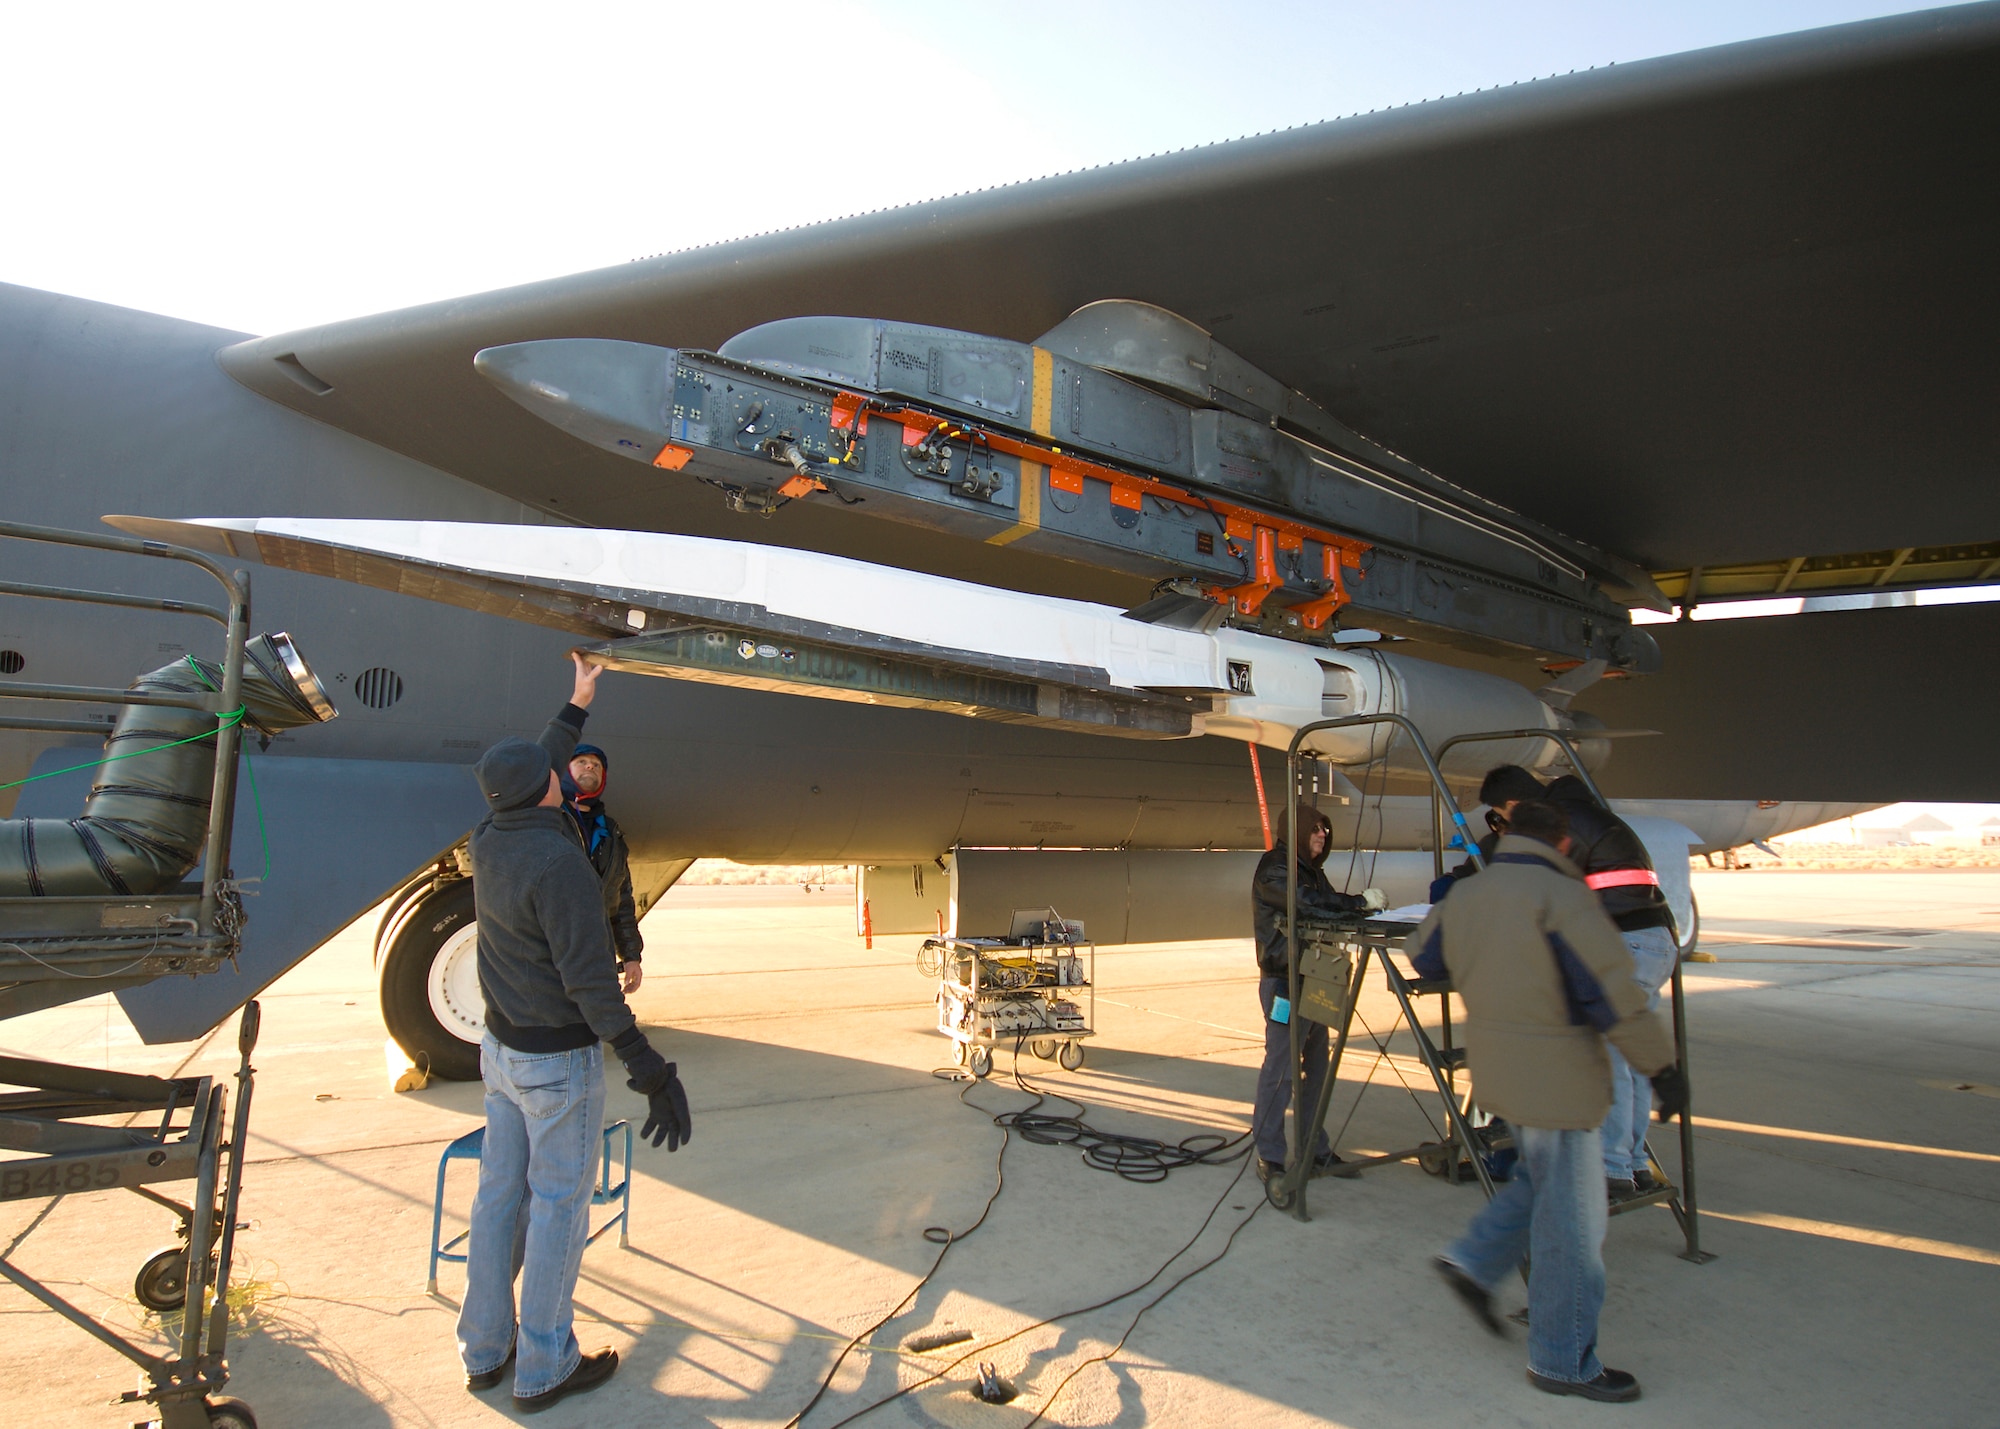 Crew members prepare the X-51A for a captive carry flight under the B-52 Stratofortress Dec. 9. The captive carry is part of the preparations being made prior to the first flight. (U.S. Air Force photo/Mike Cassidy)